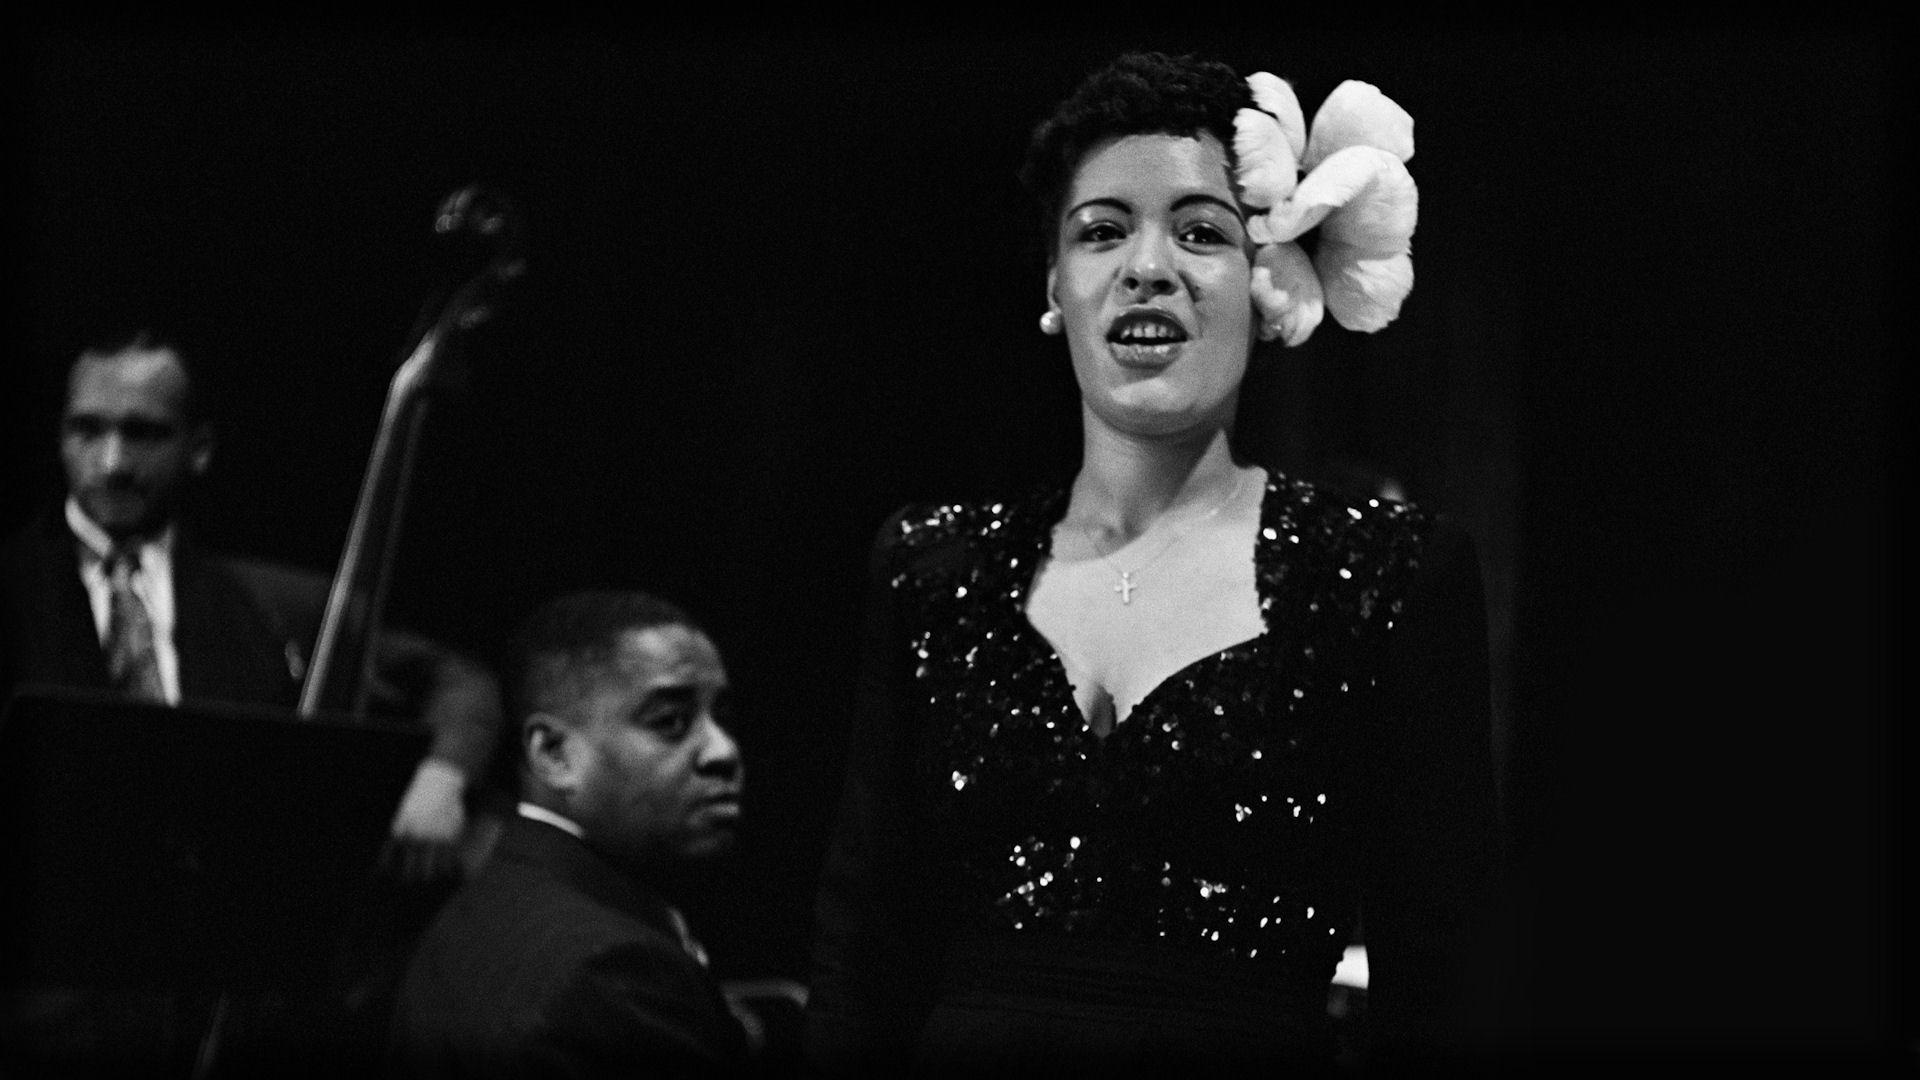 Billie Holiday, Captivating wallpapers, Iconic images, Music legend, 1920x1080 Full HD Desktop